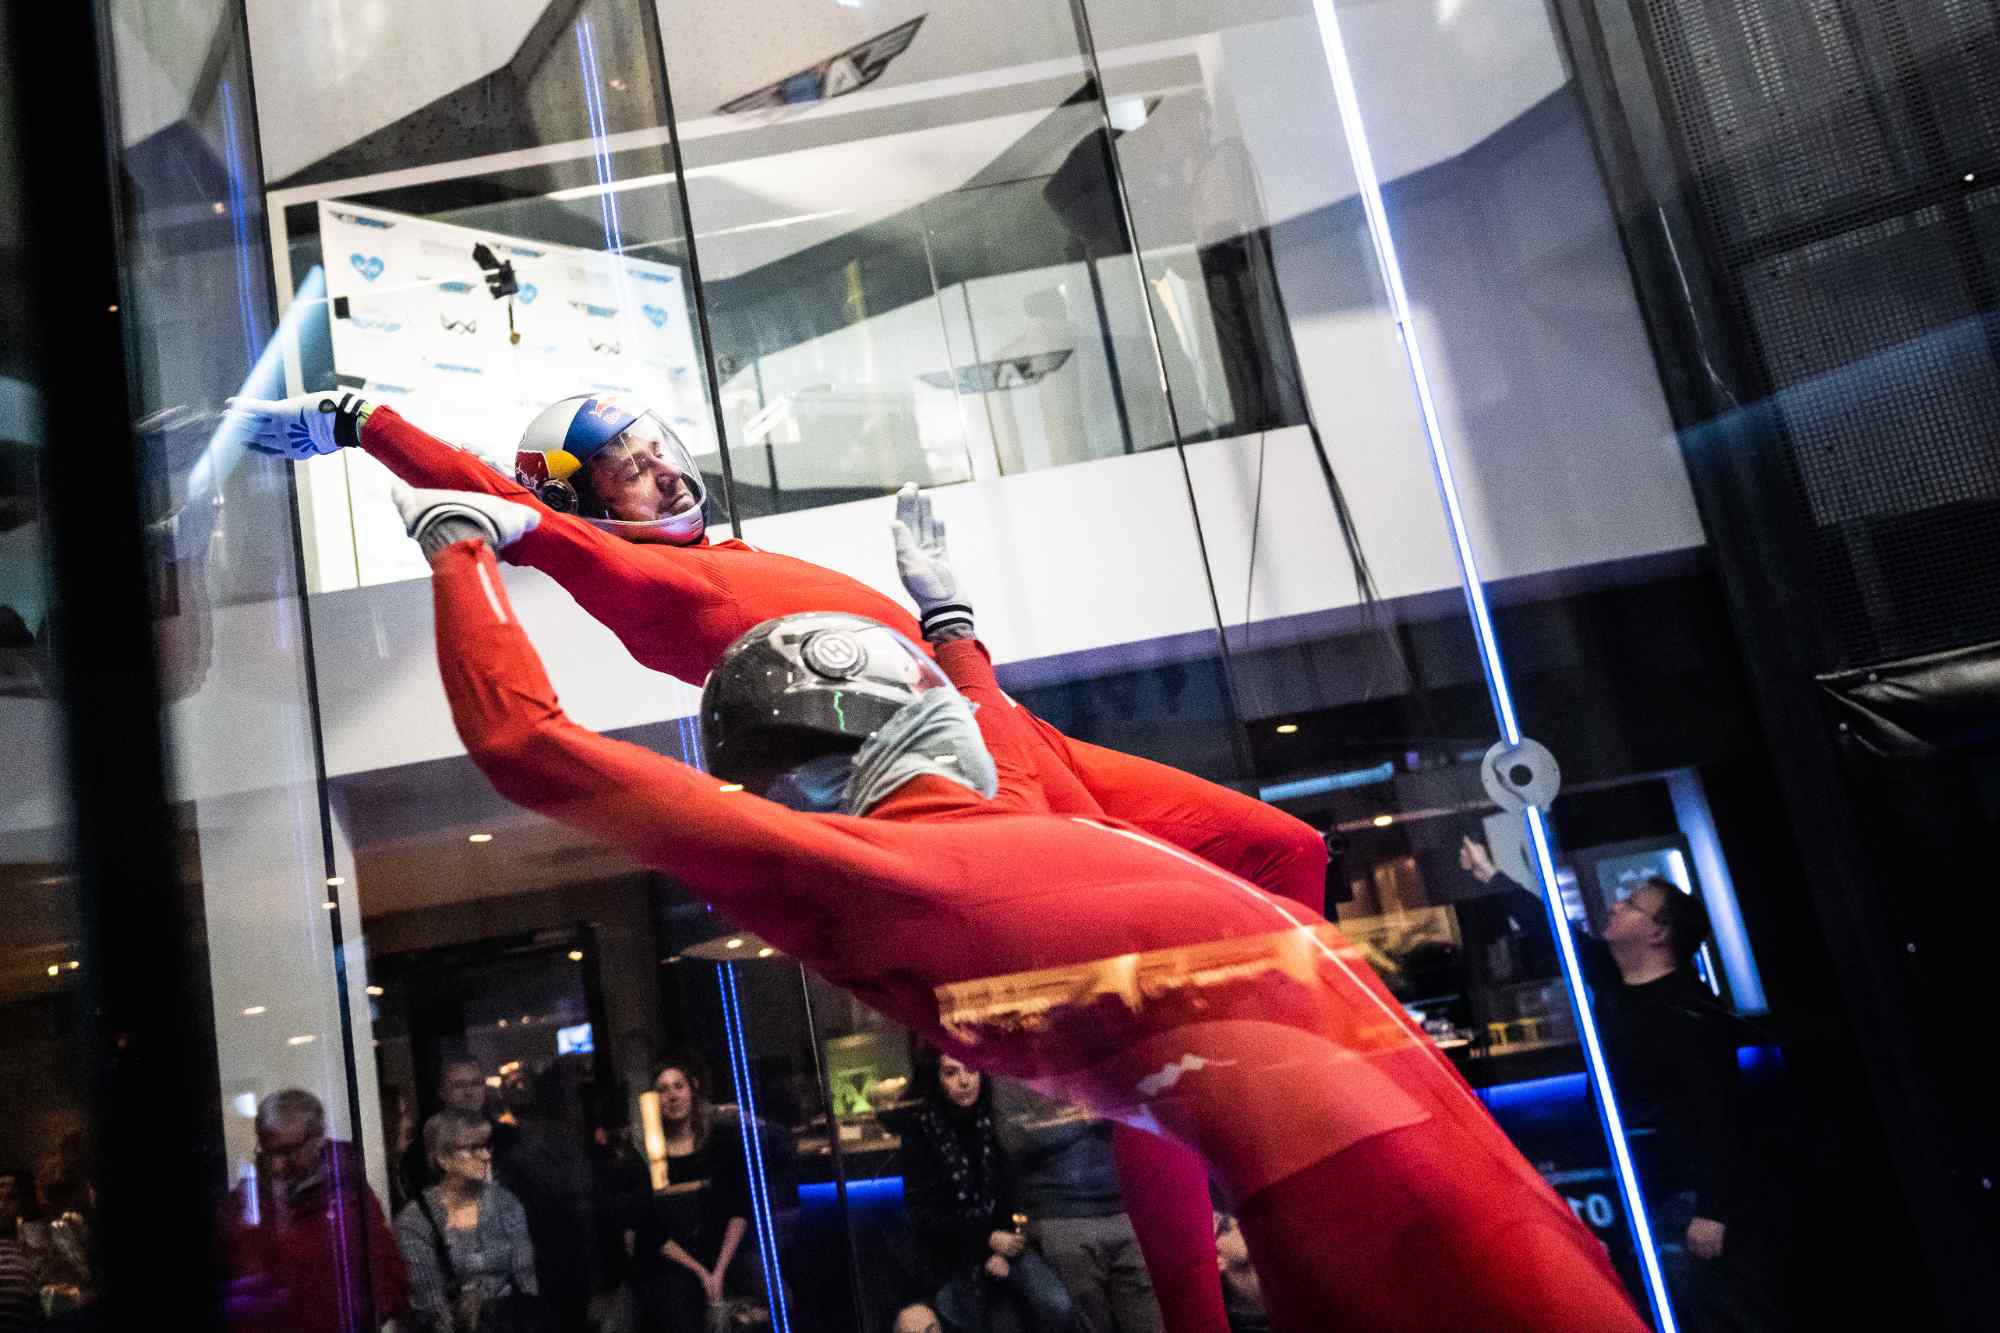 Fai Indoor Skydiving World Cup